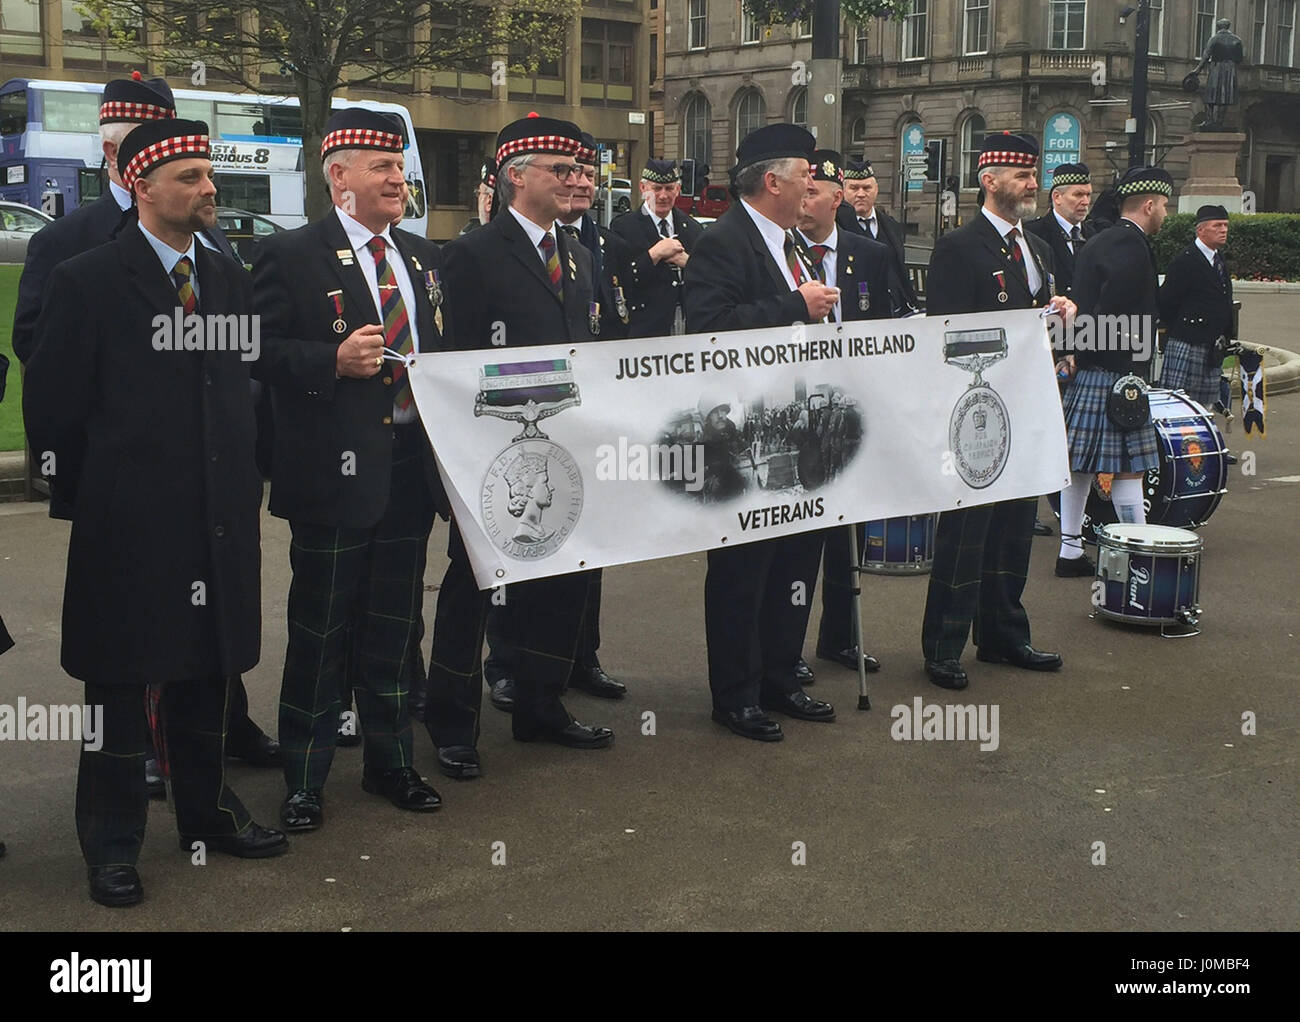 Scottish veterans at a military veterans' rally in George Square Glasgow, organised by Justice for Northern Ireland Veterans (JFNIV) which is seeking to highlight what it alleges is a legal witchhunt against former security members who served during the Troubles. Stock Photo